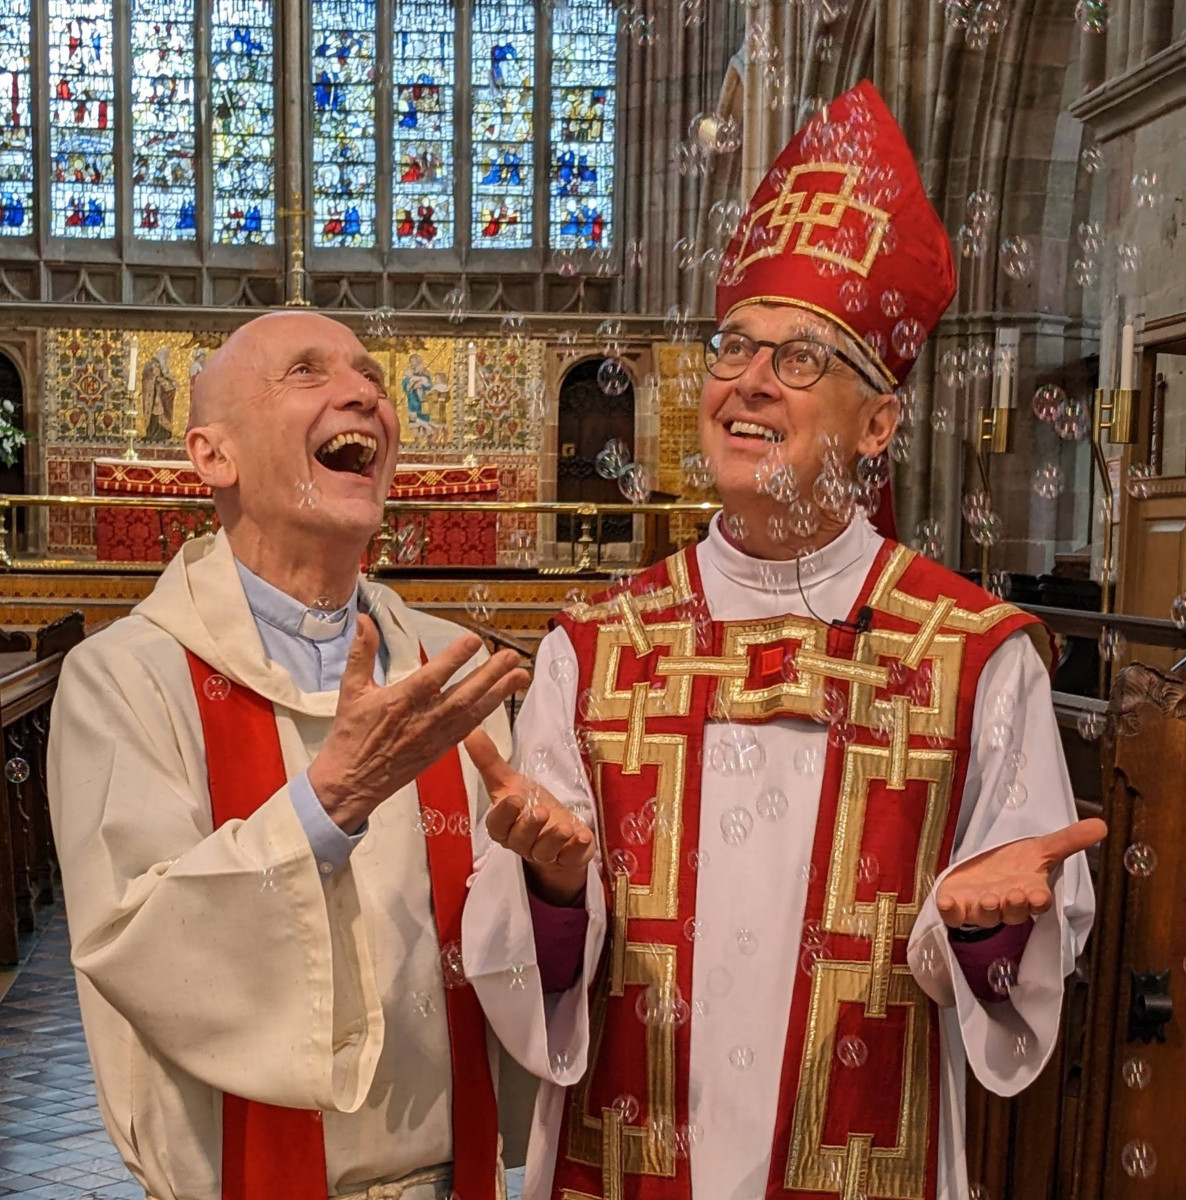 The Revd Rod Corke and Bishop Martin being showered with bubbles in the Priory.